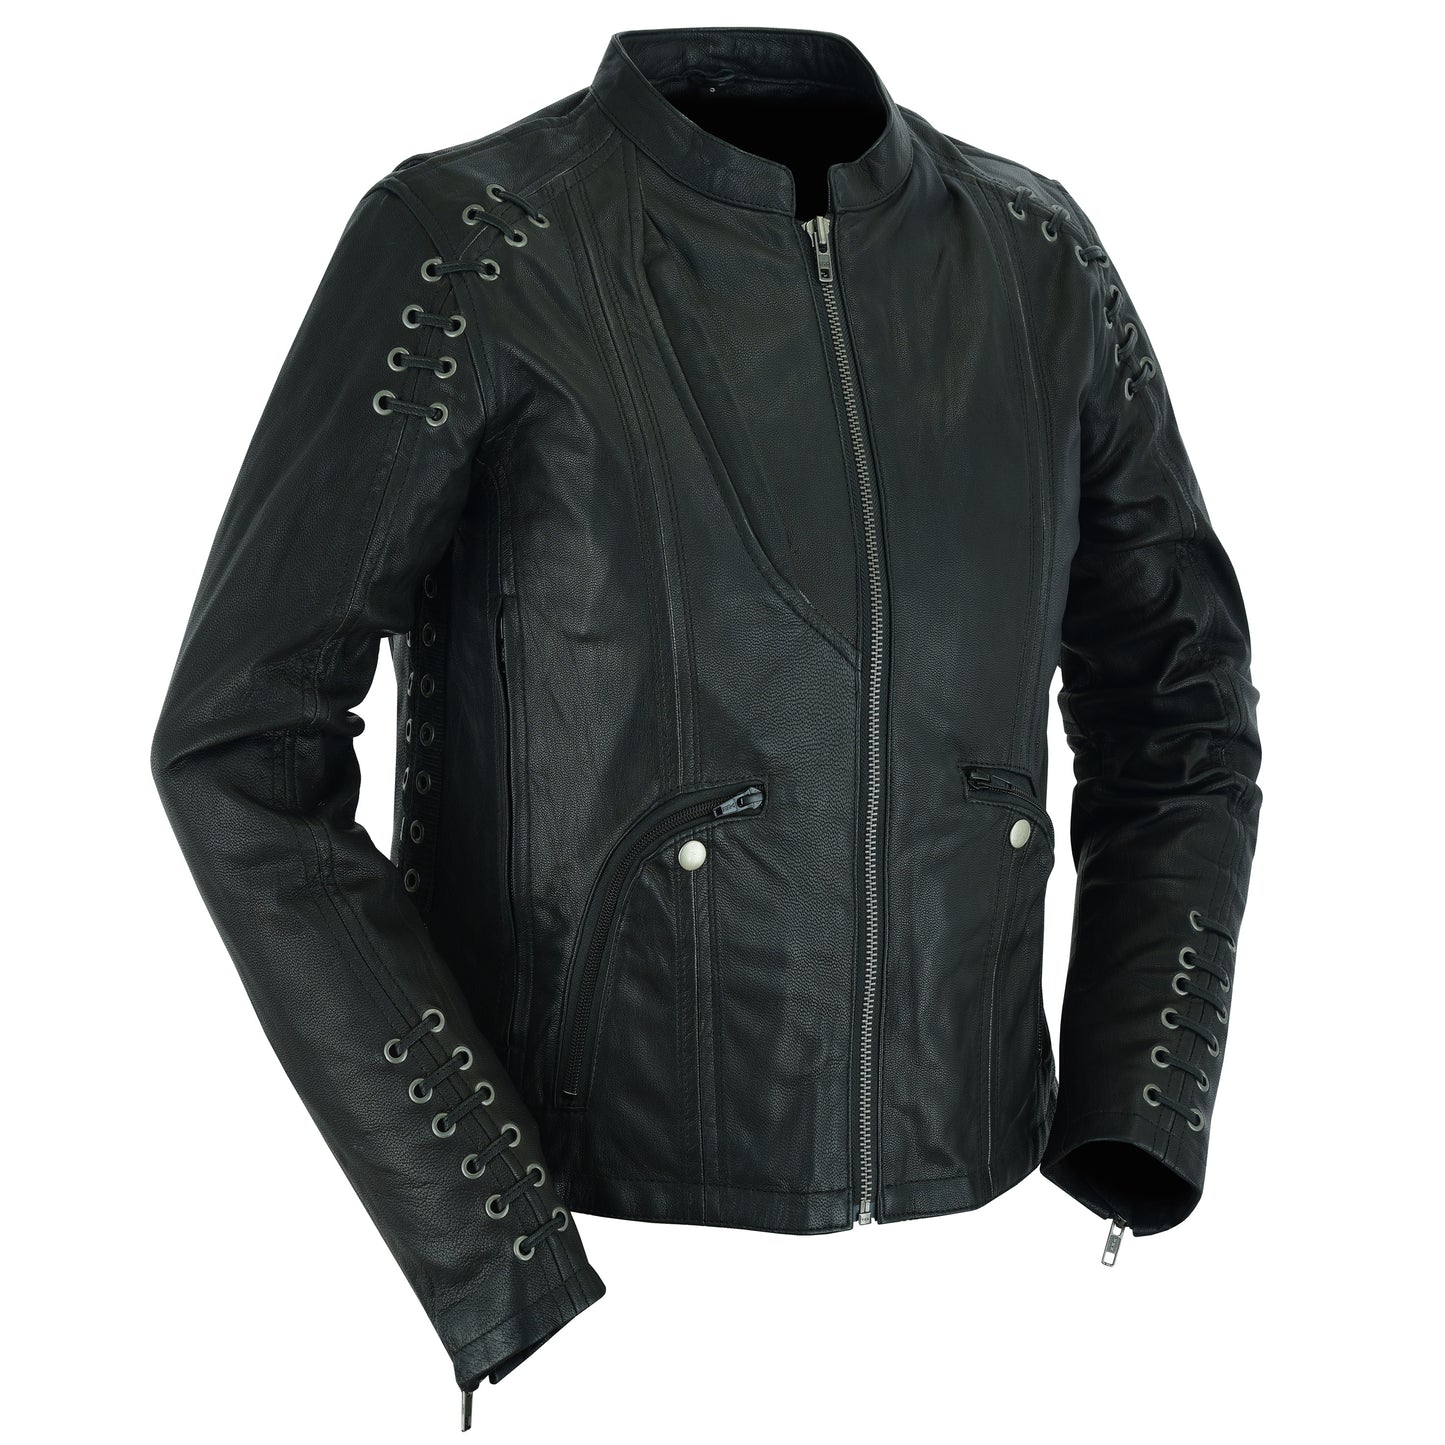 Women's Stylish Jacket with Grommet and Lacing Accents